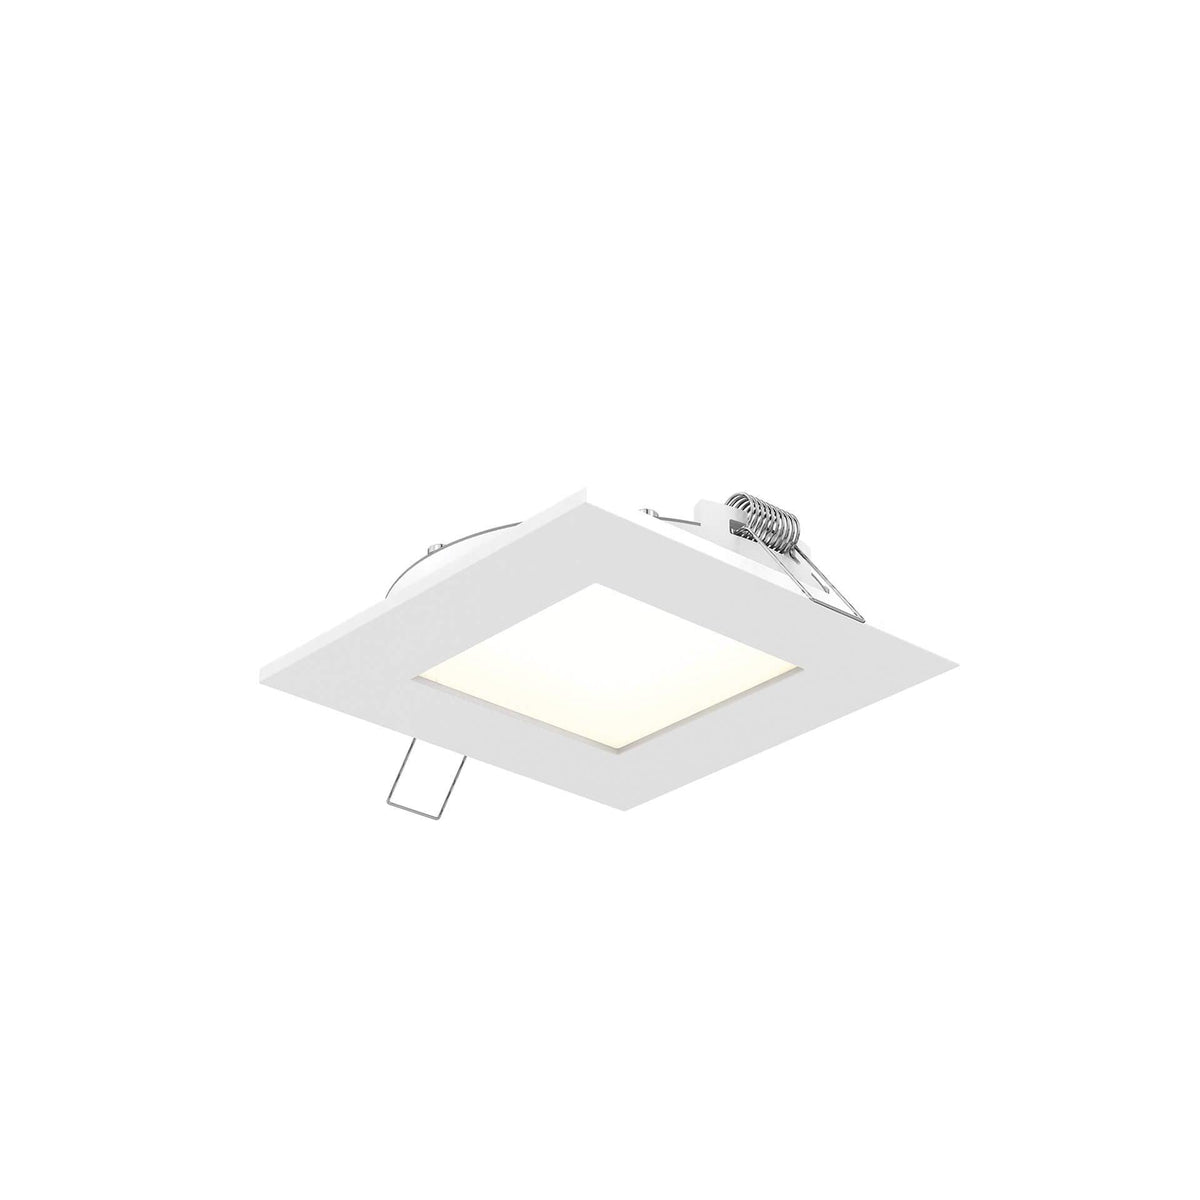 Dals Lighting - 5000 Series 4 Inch Square CCT LED Recessed Panel Light - 5004SQ-CC-WH | Montreal Lighting & Hardware